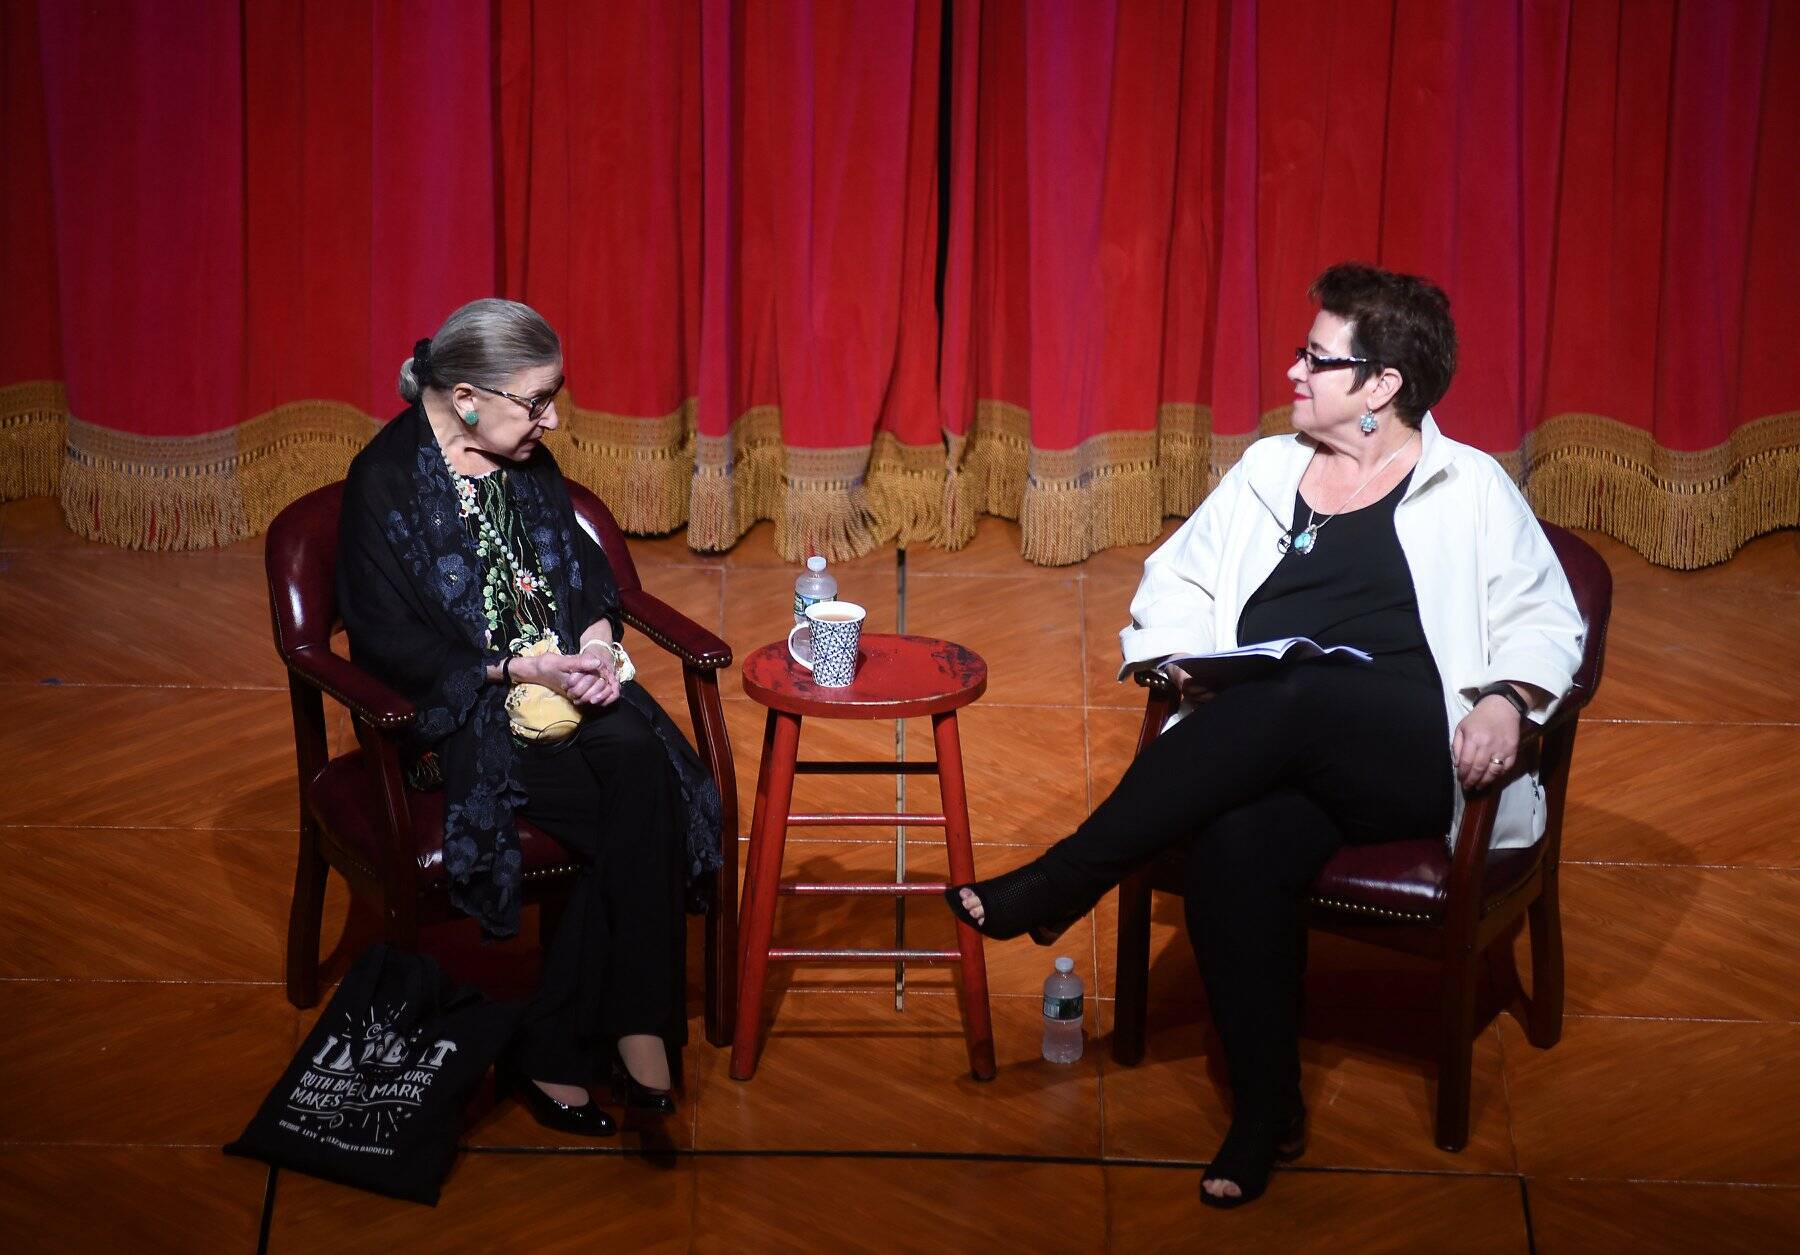 Courtesy Photo / Arena Stage 
Molly Smith interviews U.S. Supreme Court Justice Ruth Bader Ginsburg. Ginsburg, a patron at Arena Stage, performed the marriage of Smith and her partner Suzanne Blue Star Boy in 2014.